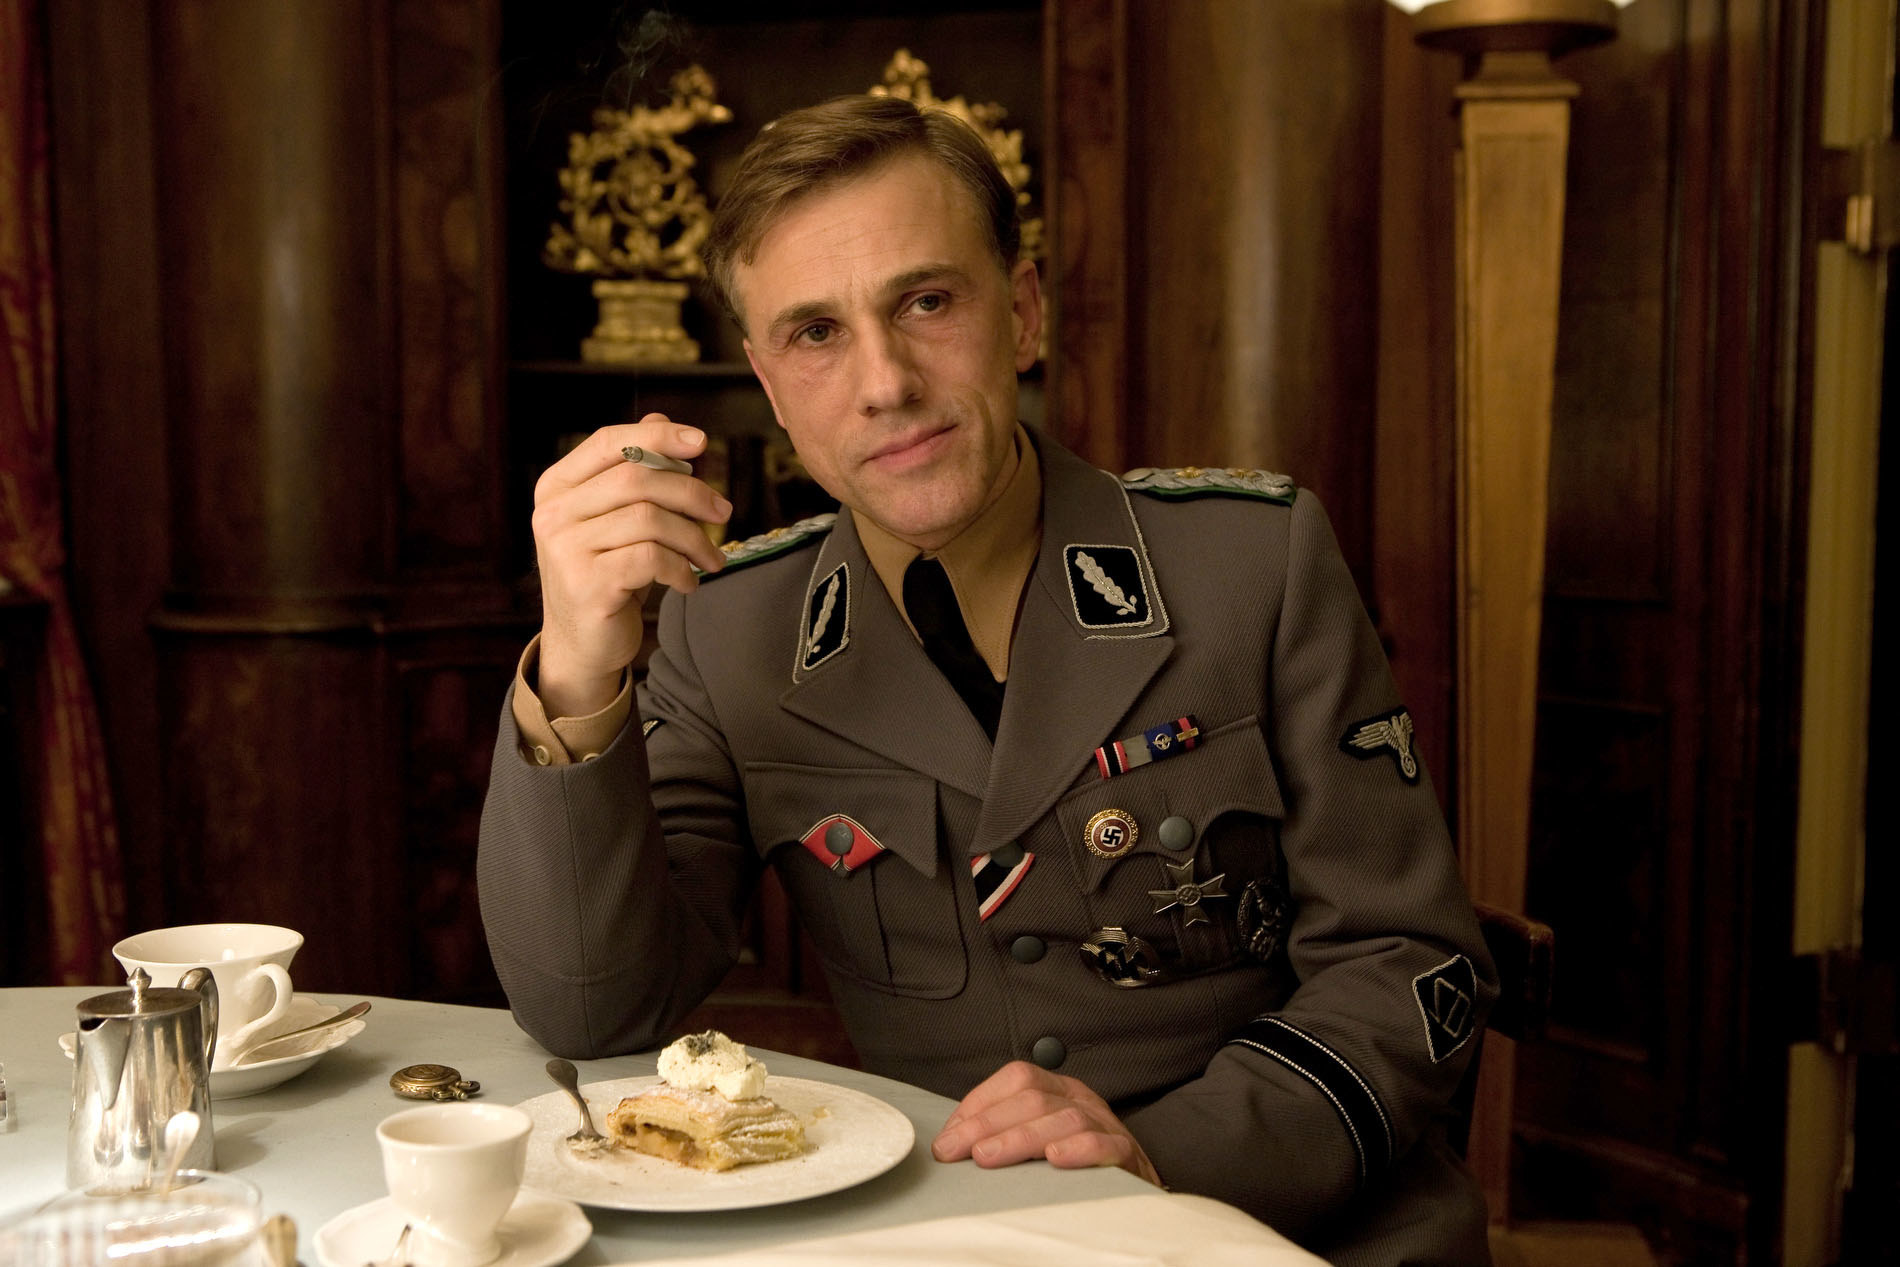 Christoph Waltz sitting at a dinner table